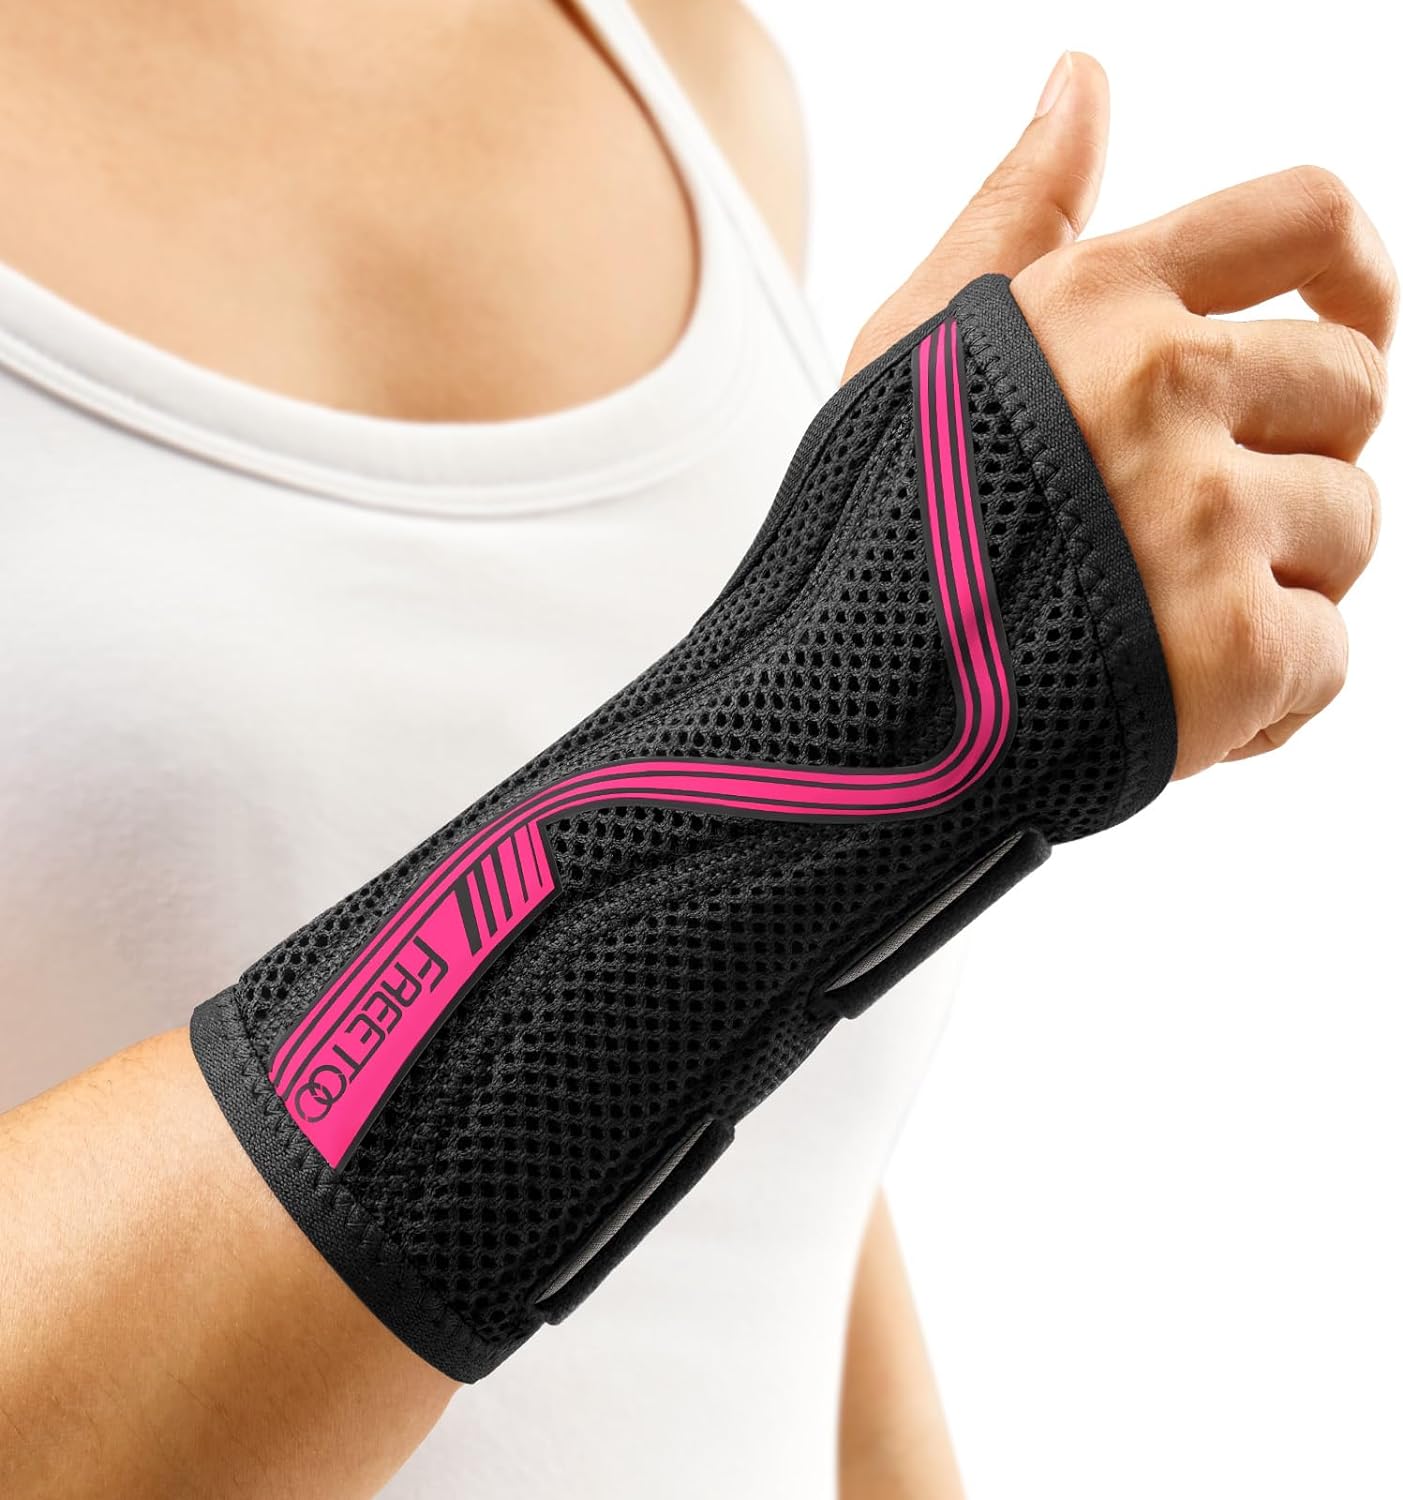 FREETOO Wrist Brace for Carpal Tunnel,[New Upgrade-Anatomically shaped] Adjustable Wrist Support Splint for Men and Women,Hand Brace for Pain Relief, Tendinitis,Arthritis,Right Hand,Medium(Wrist Size:17-21CM)